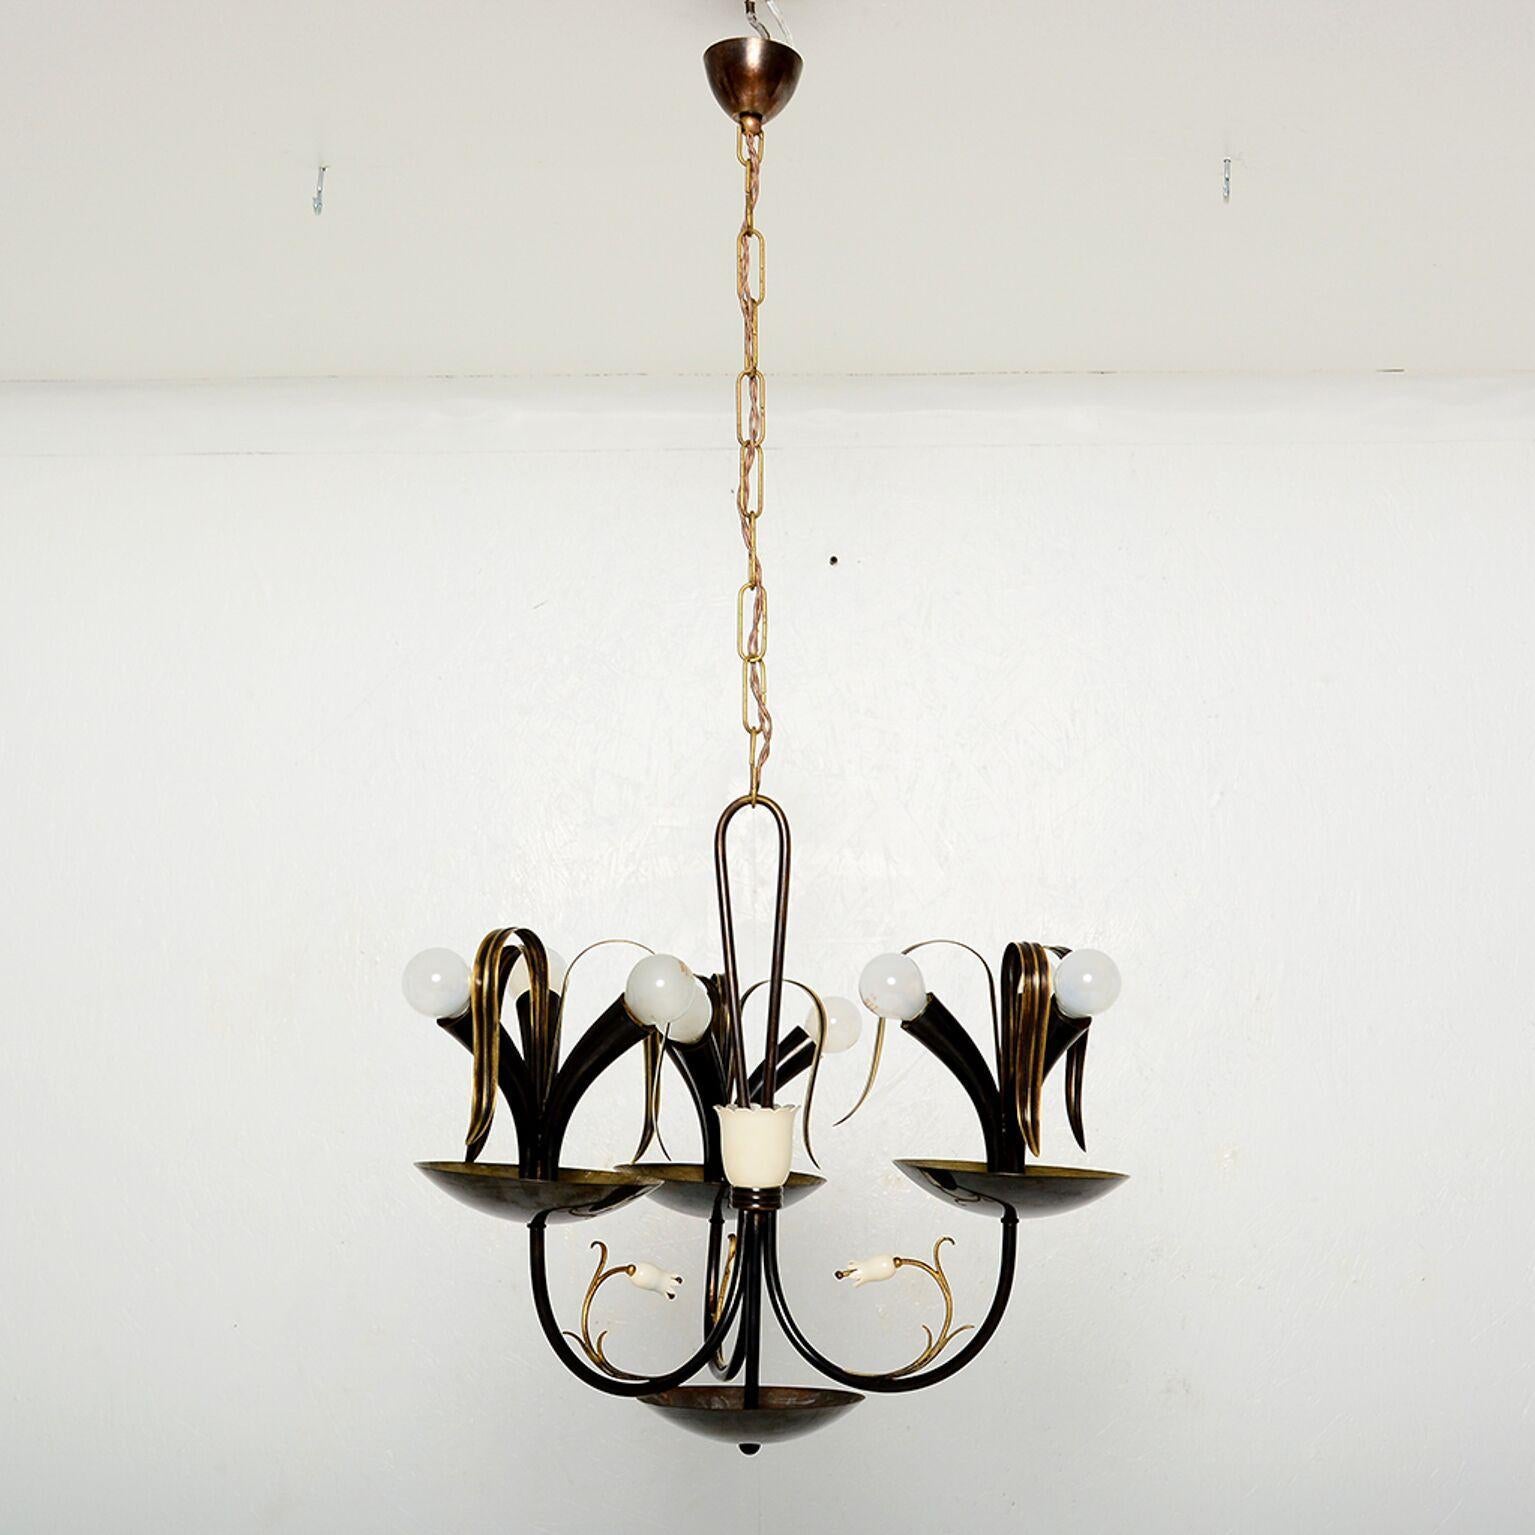 For your consideration a vintage Italian chandelier. Patinated brass looks like a flower arrangement. Beautiful design from Gio Ponti era.

Requires nine (9) E-14 bulbs (25 to 40 watts). The chandelier has been rewired and it is fully restored. No